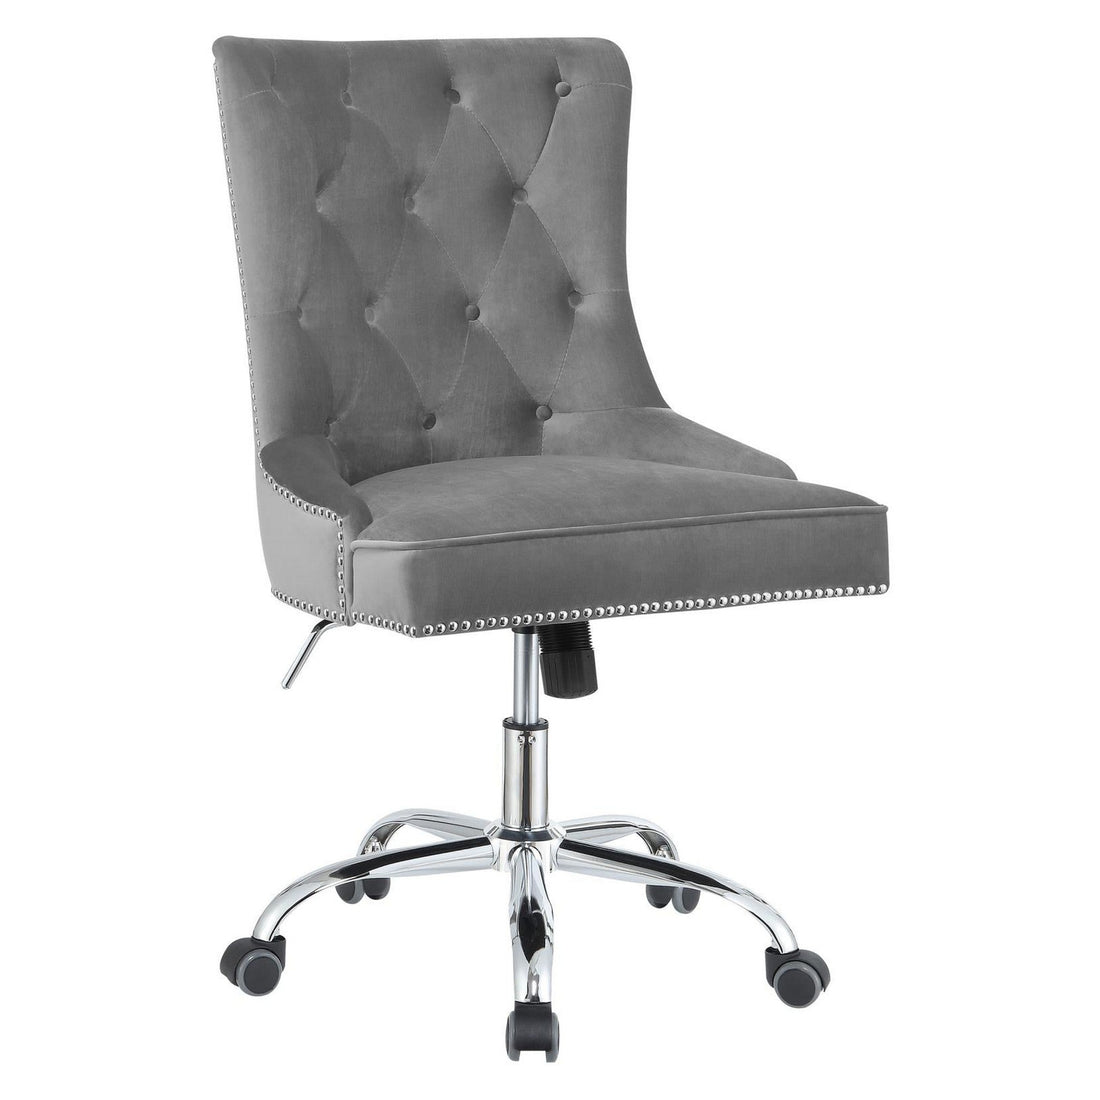 Torrance Tufted Back Office Chair Grey and Chrome 801994